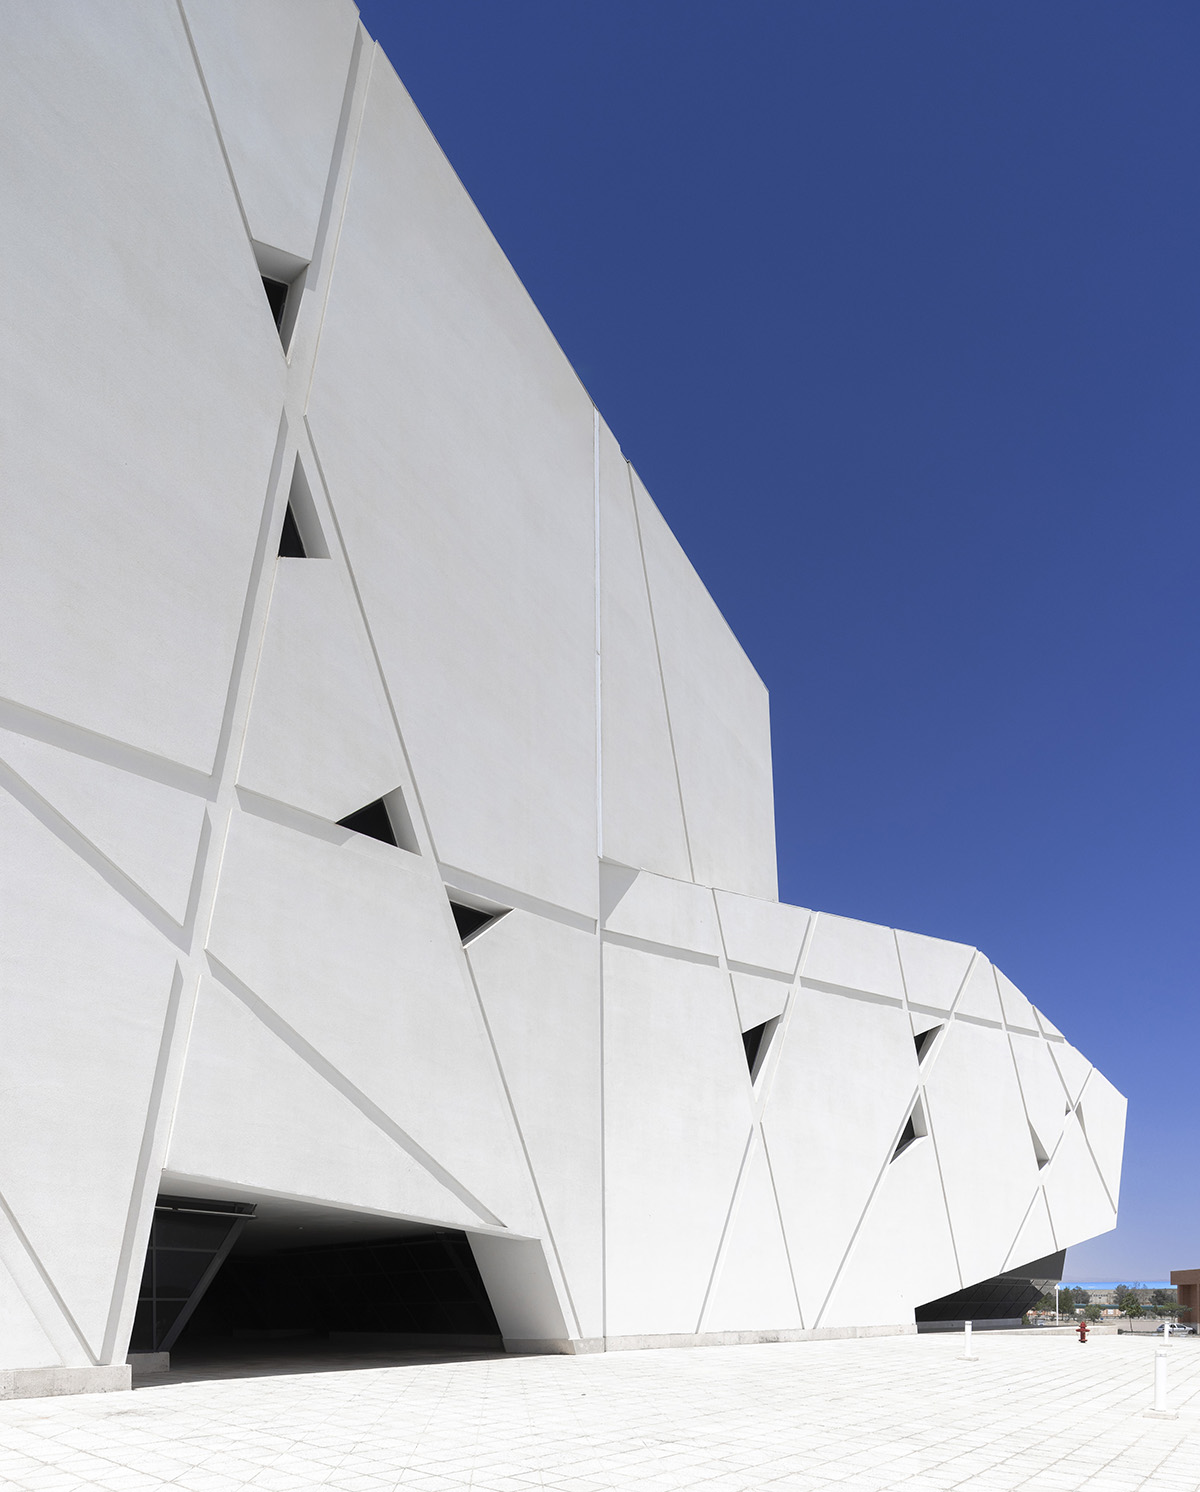 New monolithic auditorium and library at Semnan University features intricate openings and ribbons 